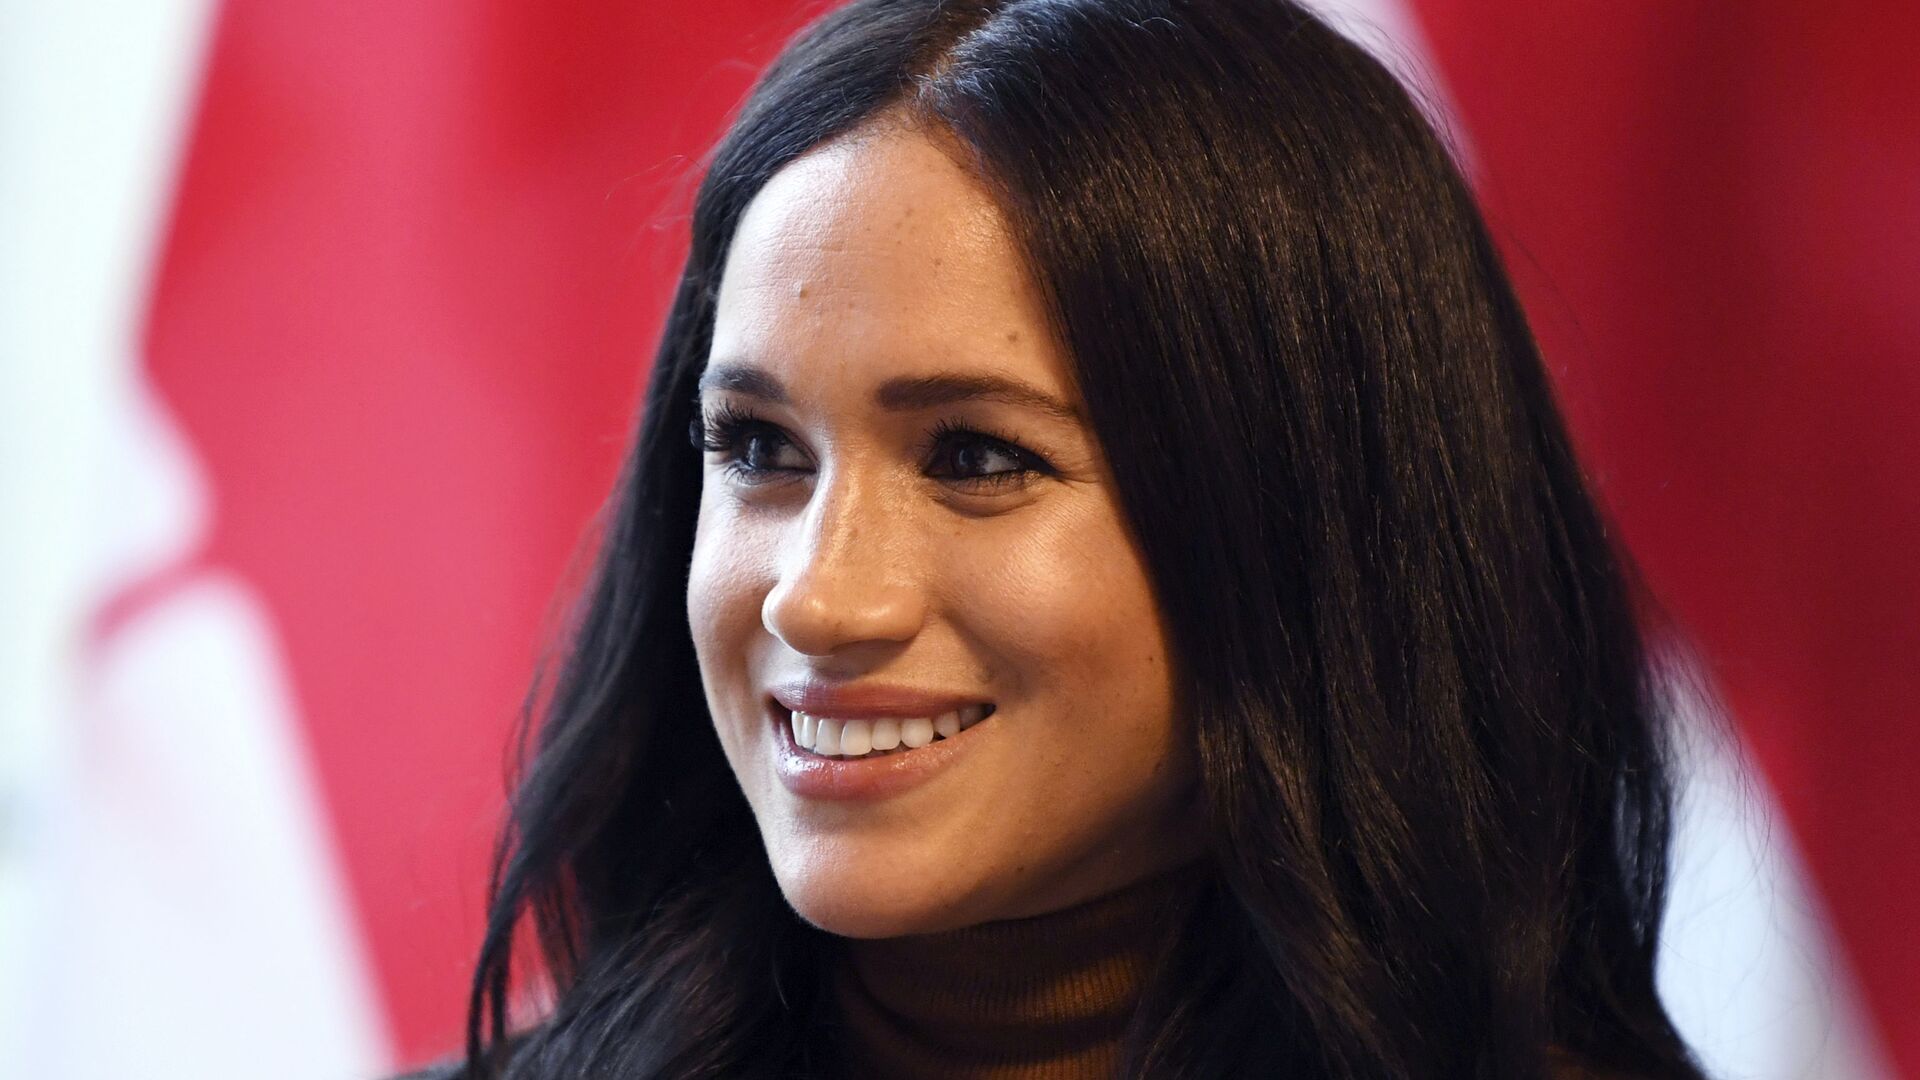 In this Tuesday, Jan. 7, 2020 file photo, Meghan, Duchess of Sussex smiles during her visit with Prince Harry to Canada House, in London - Sputnik International, 1920, 10.05.2022